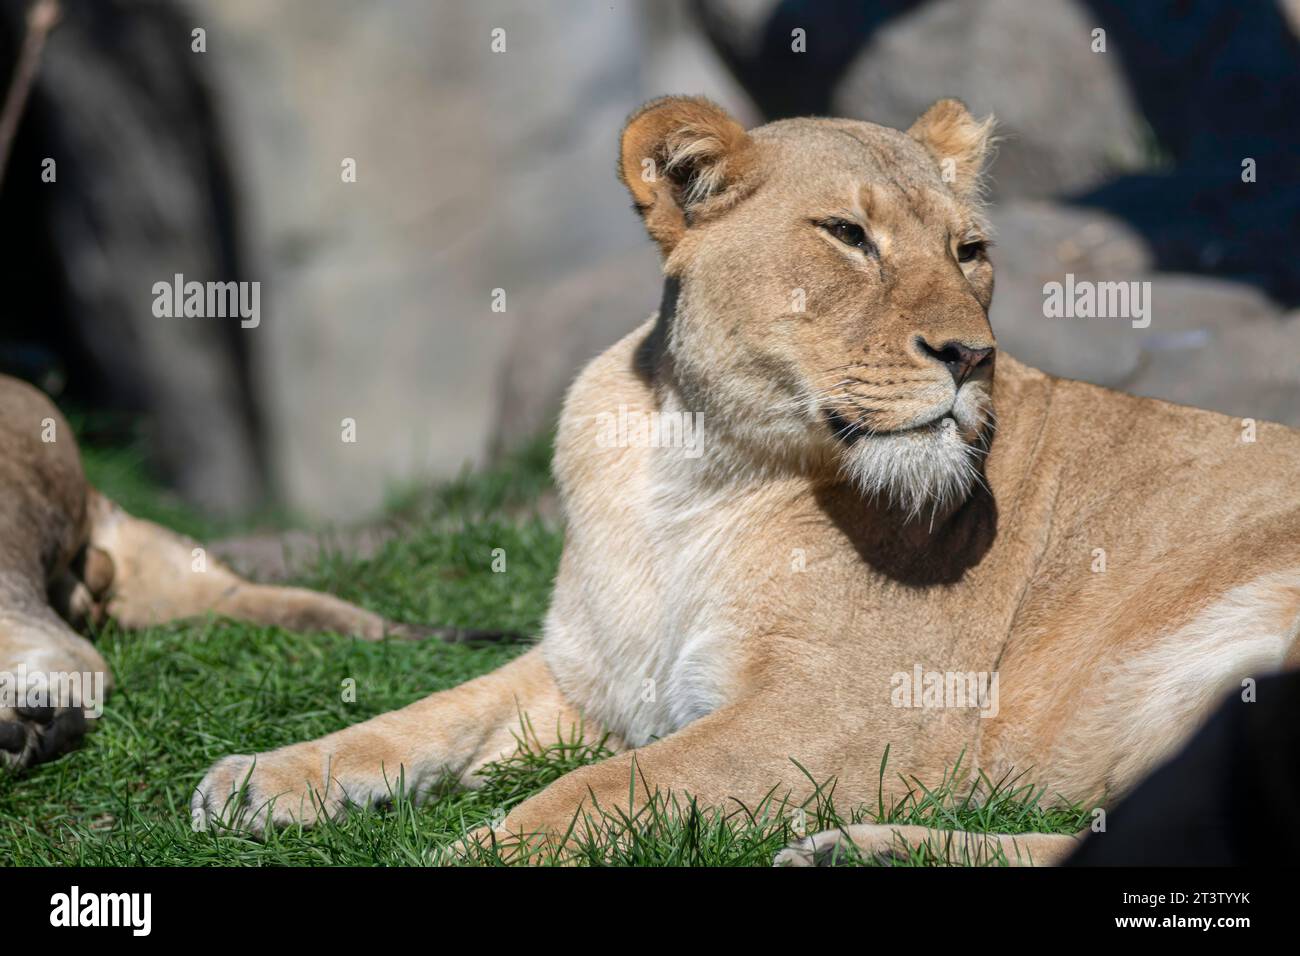 Isolated close up high resolution portrait of a single African lion ...